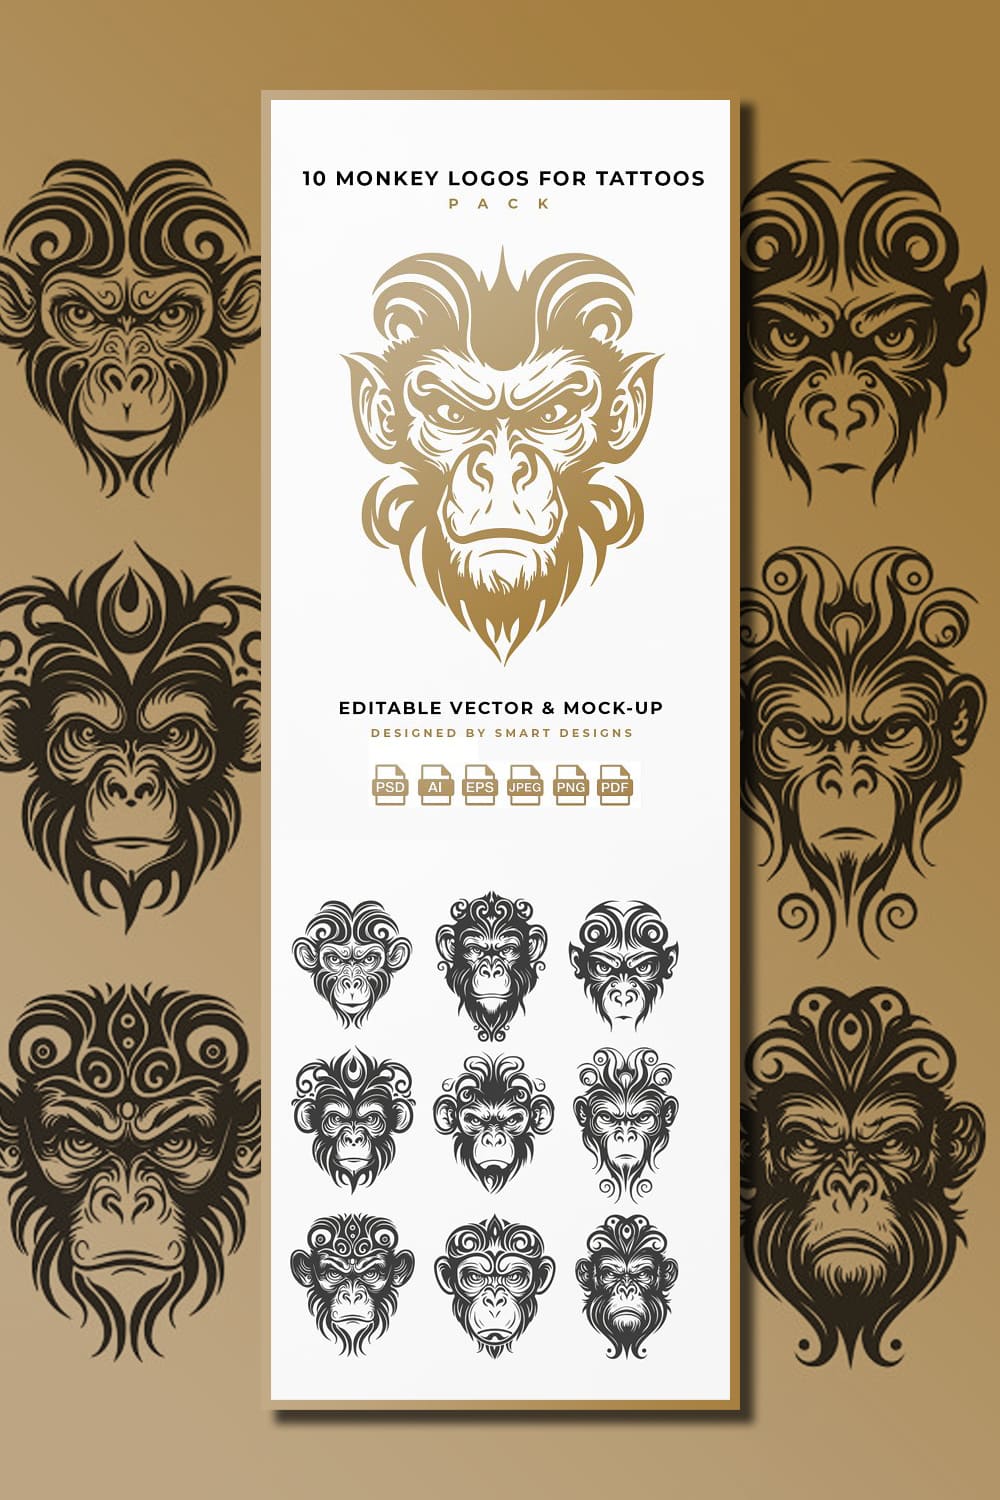 10 monkey logos for tattoos pack editable vector and mock up.